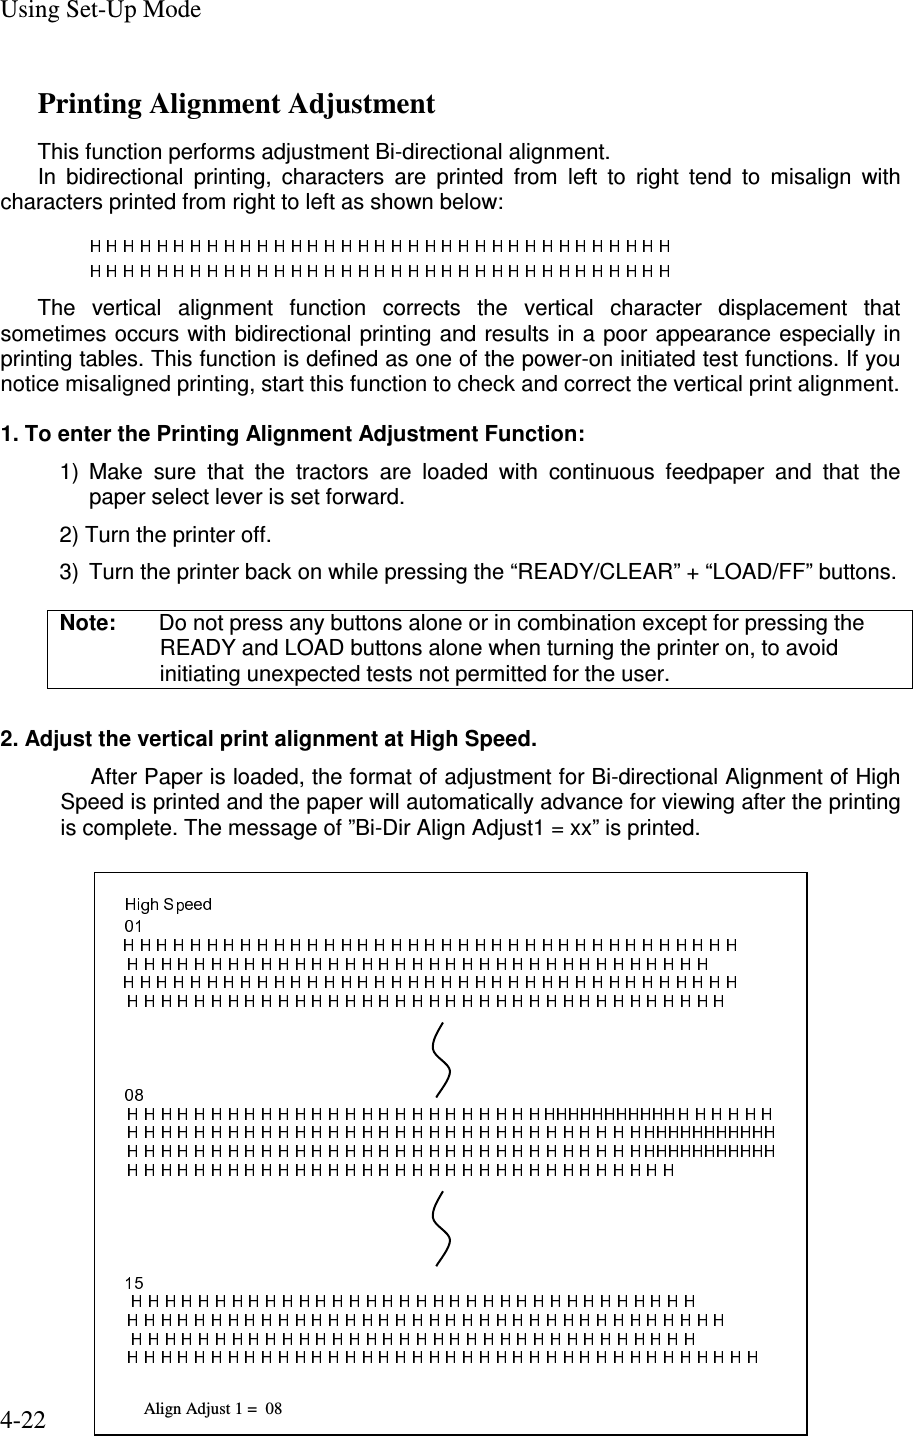 Using Set-Up Mode 4-22 Printing Alignment Adjustment   This function performs adjustment Bi-directional alignment. In  bidirectional  printing,  characters  are  printed  from  left  to  right  tend  to  misalign  with characters printed from right to left as shown below:    The  vertical  alignment  function  corrects  the  vertical  character  displacement  that sometimes occurs with bidirectional printing and results in a poor appearance especially in printing tables. This function is defined as one of the power-on initiated test functions. If you notice misaligned printing, start this function to check and correct the vertical print alignment.  1. To enter the Printing Alignment Adjustment Function: 1)  Make  sure  that  the  tractors  are  loaded  with  continuous  feedpaper  and  that  the paper select lever is set forward. 2) Turn the printer off. 3)  Turn the printer back on while pressing the “READY/CLEAR” + “LOAD/FF” buttons. Note:  Do not press any buttons alone or in combination except for pressing the READY and LOAD buttons alone when turning the printer on, to avoid initiating unexpected tests not permitted for the user.  2. Adjust the vertical print alignment at High Speed. After Paper is loaded, the format of adjustment for Bi-directional Alignment of High Speed is printed and the paper will automatically advance for viewing after the printing is complete. The message of ”Bi-Dir Align Adjust1 = xx” is printed.                Align Adjust 1 =  08  